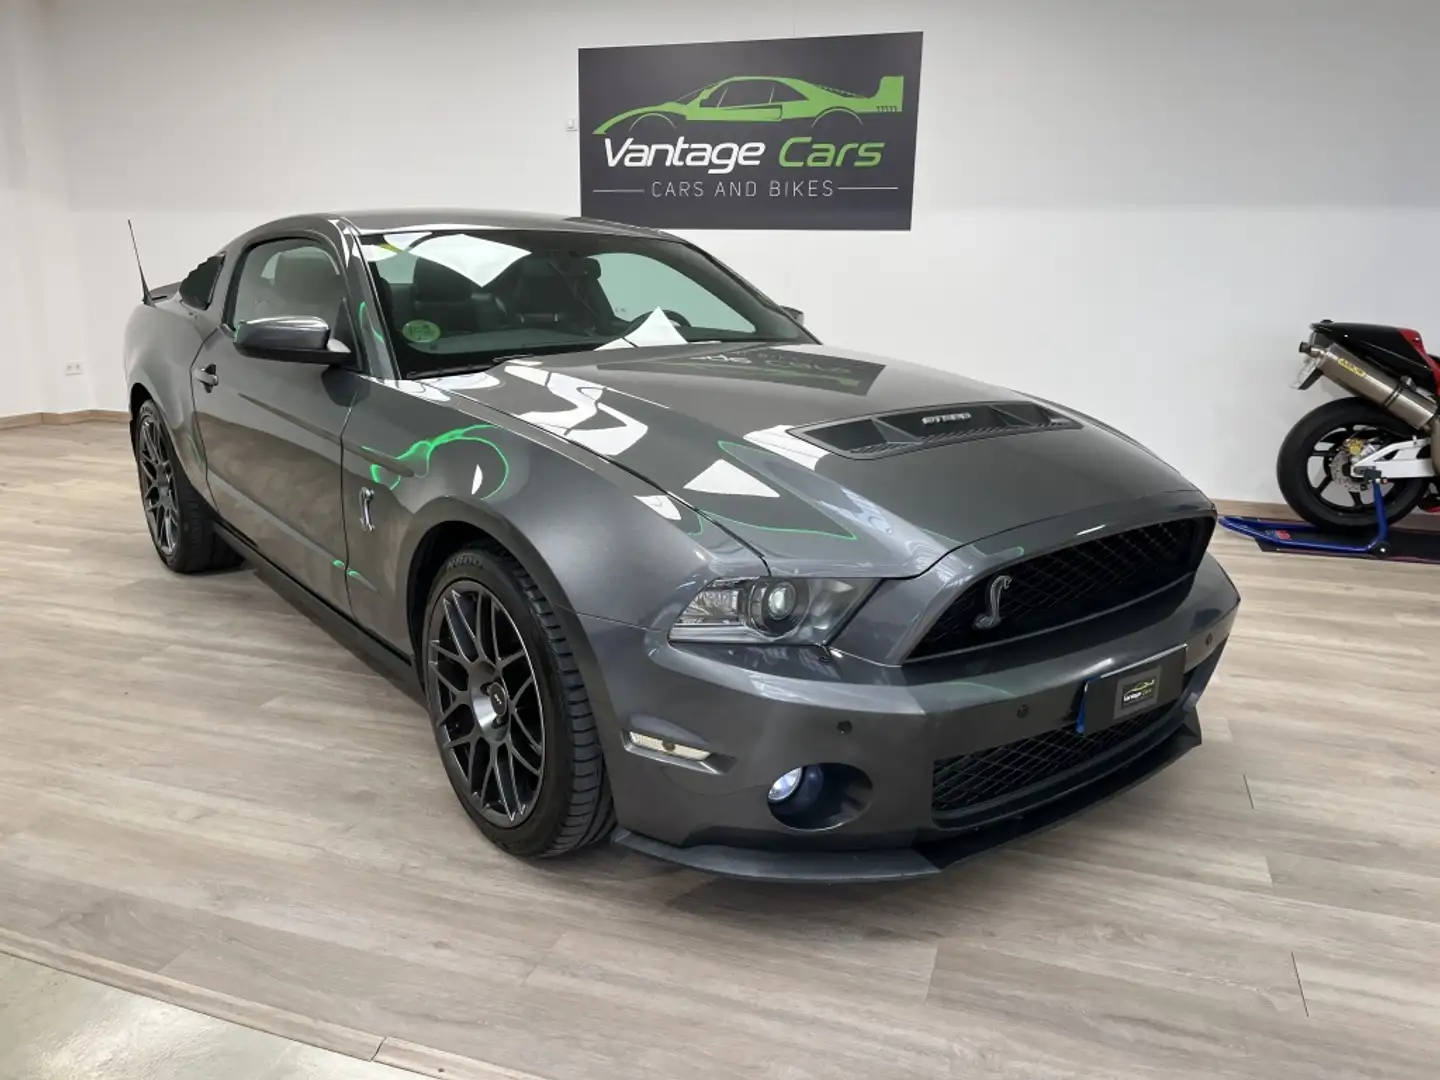 Ford Mustang Shelby V8 5.4 GT500 Grey - 2